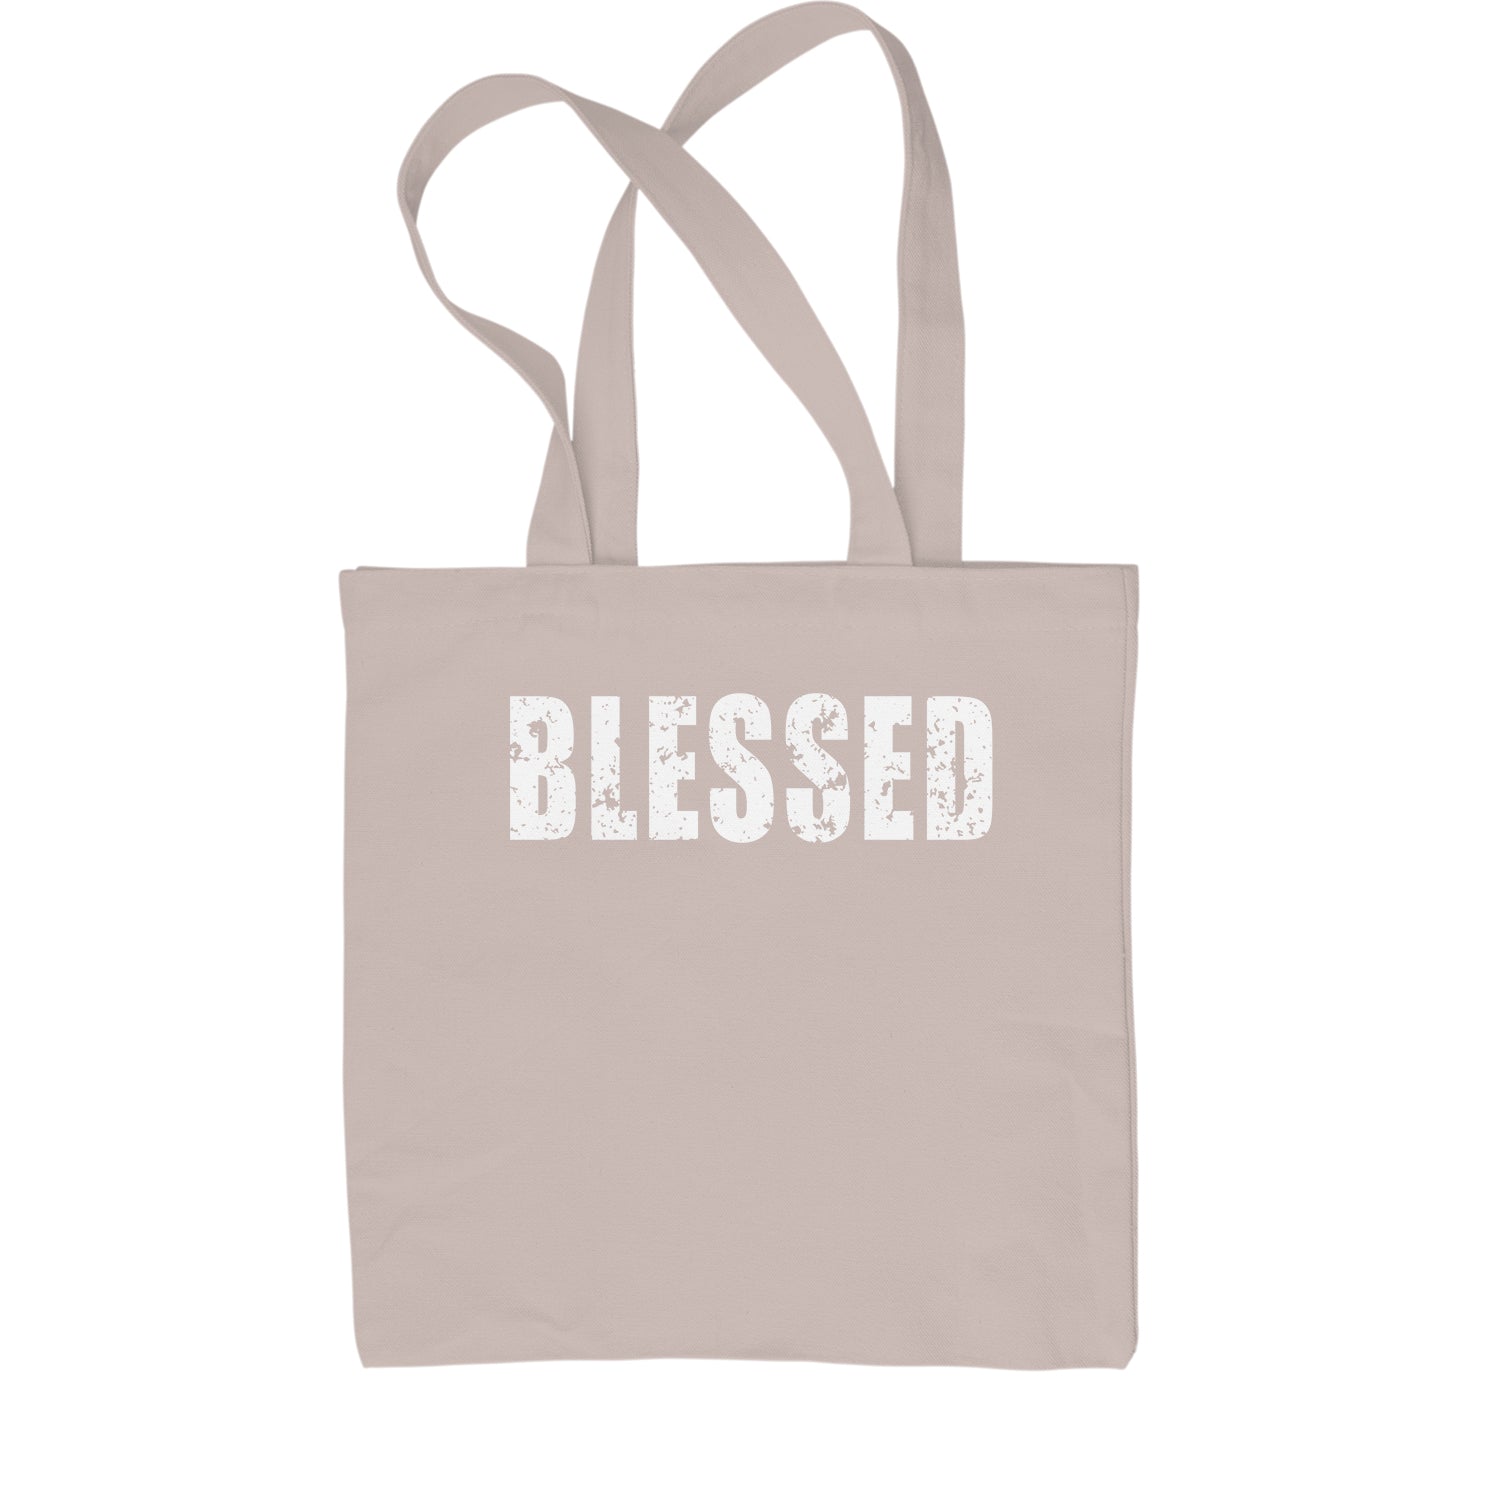 Blessed Religious Grateful Thankful Shopping Tote Bag #expressiontees by Expression Tees